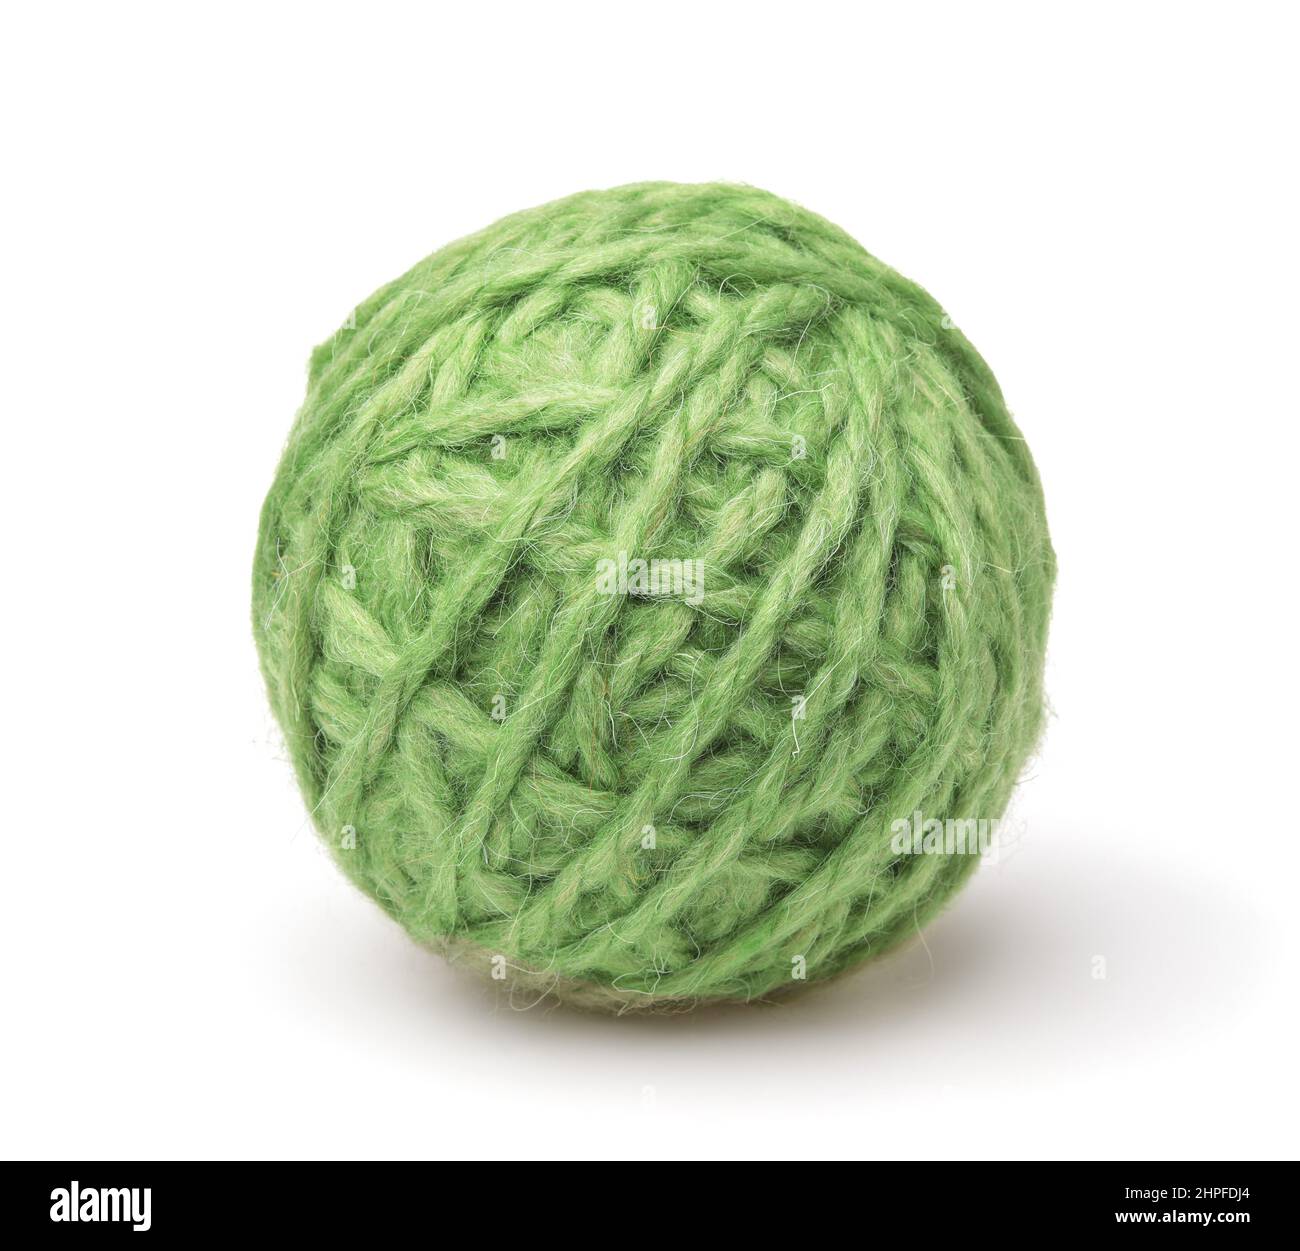 Front view of olive green wool yarn ball isolated on white Stock Photo